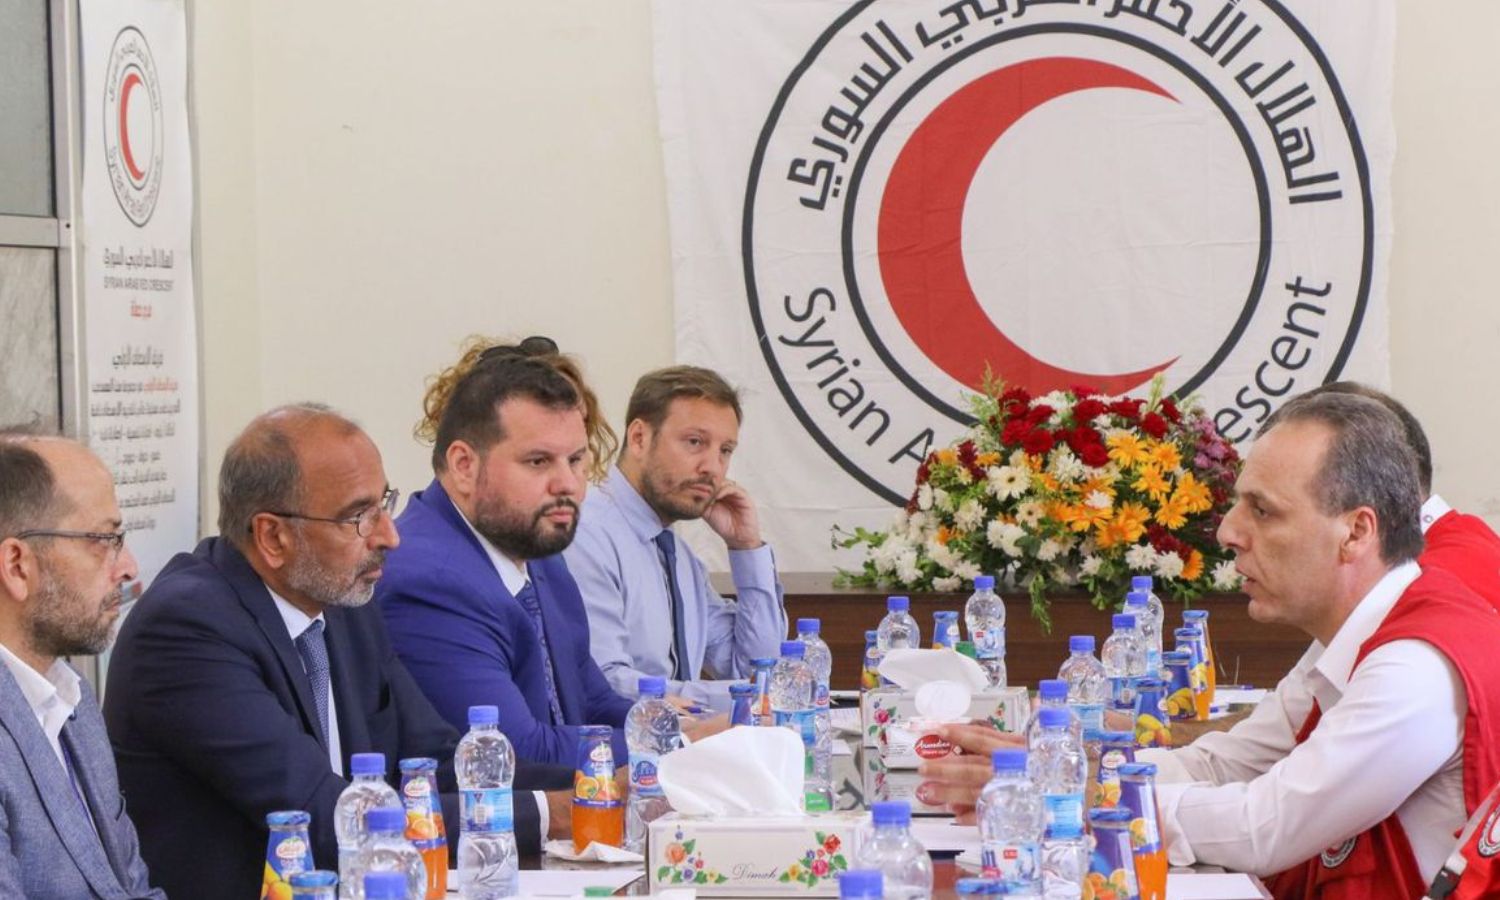 The head of the EU Delegation to SYRIA, Dan Stoenescu, visits the Syrian Arab Red Crescent (SARC) in Hama, accompanied by a UN delegation - 10 August 2022 (SARC’s Facebook page)